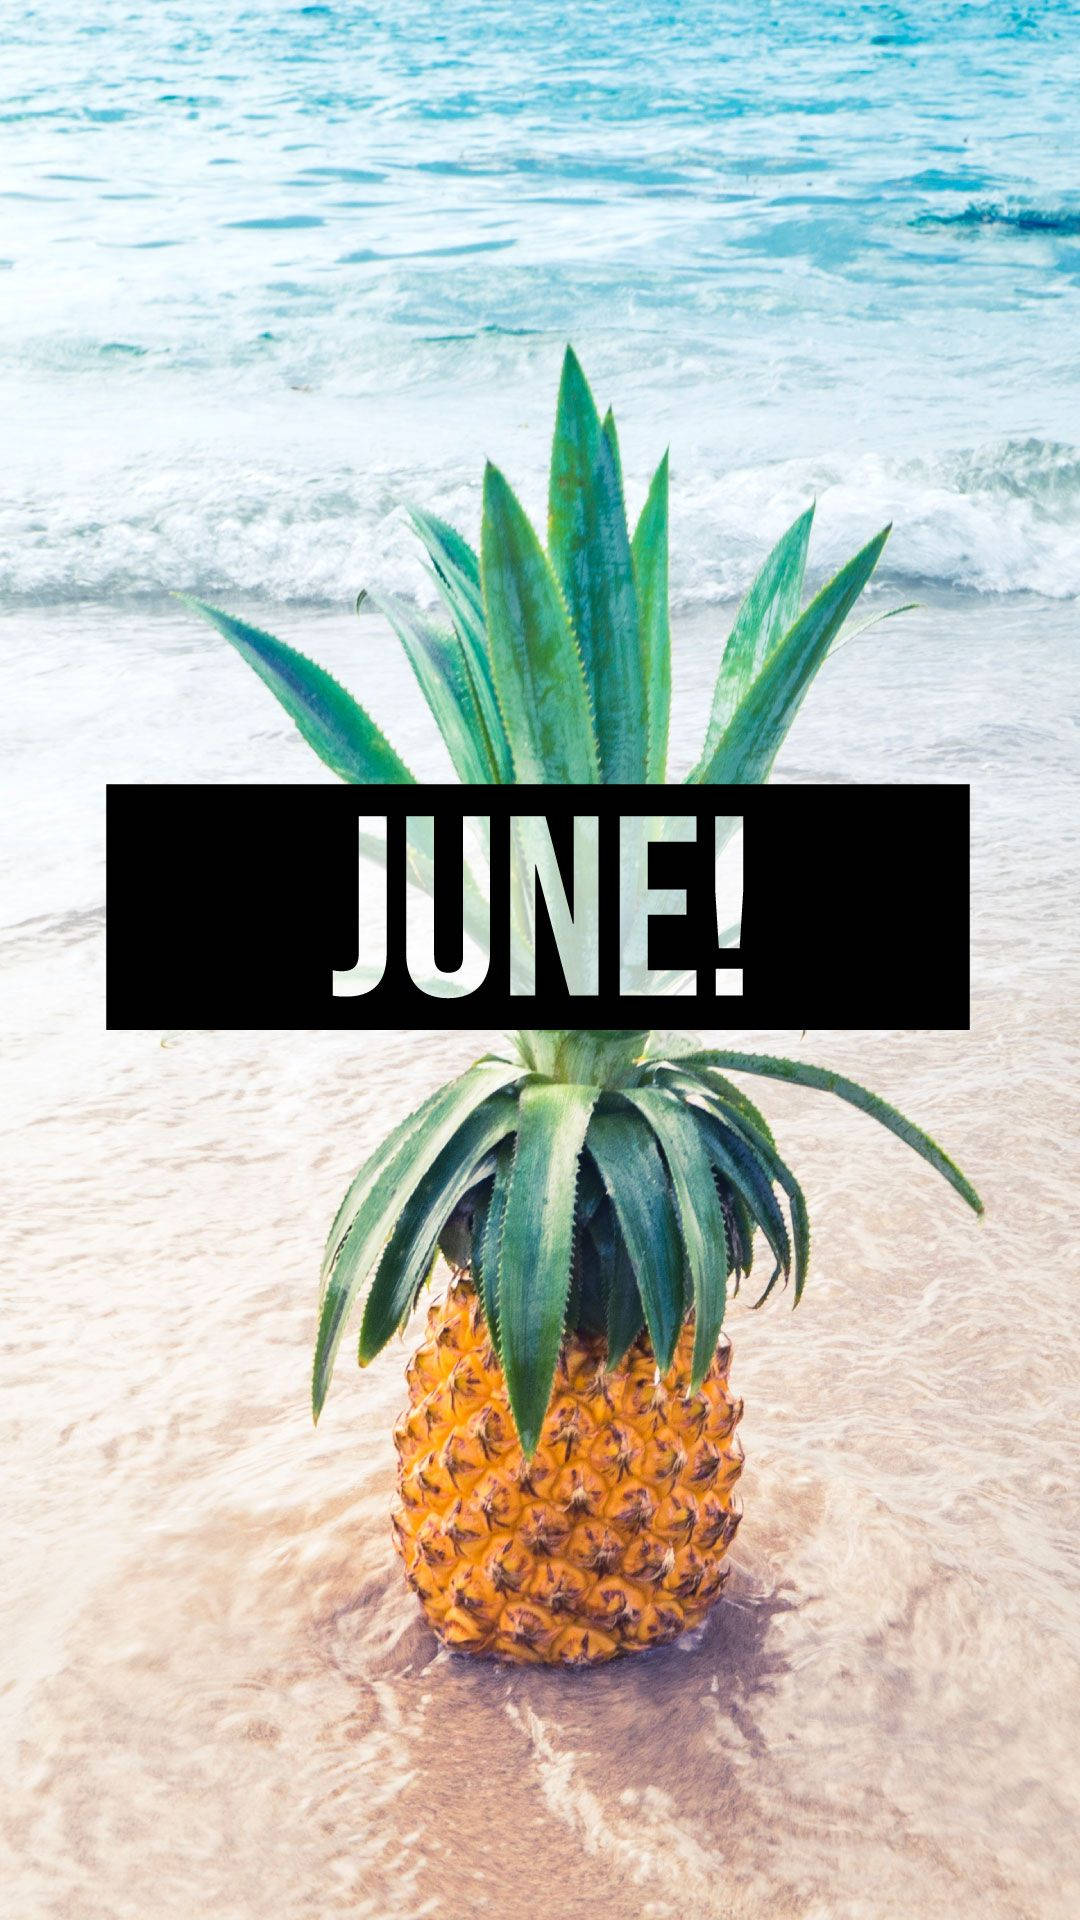 Celebrate June with a Sweet and Juicy Pineapple Wallpaper